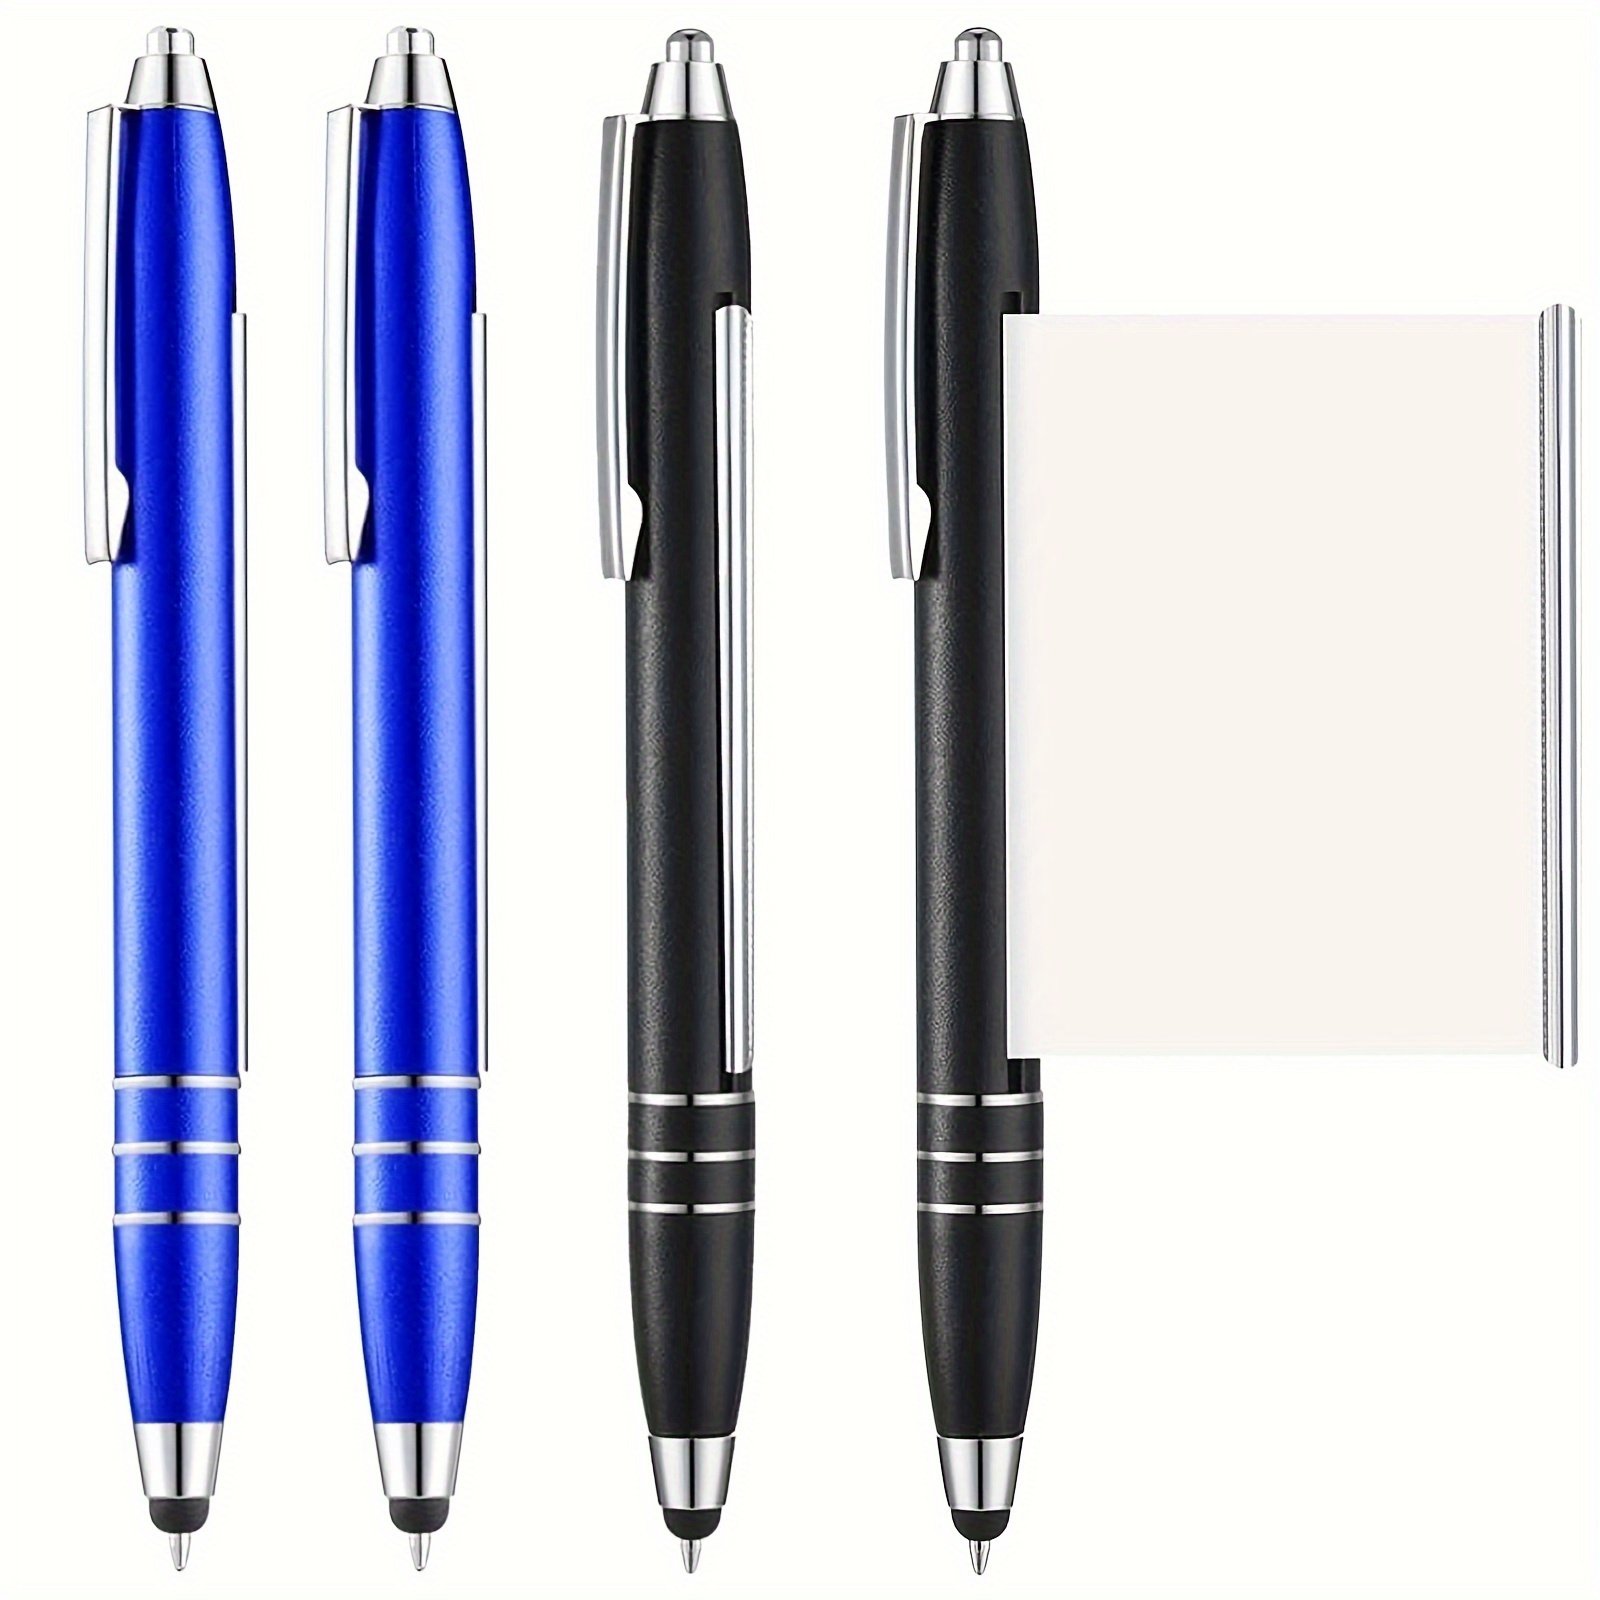 

Tasahni 4-piece Retractable Ballpoint Pens With Built-in Cheat Sheet & Cutter - Ideal For Students, Graduation, Office & School Use - Blue/black